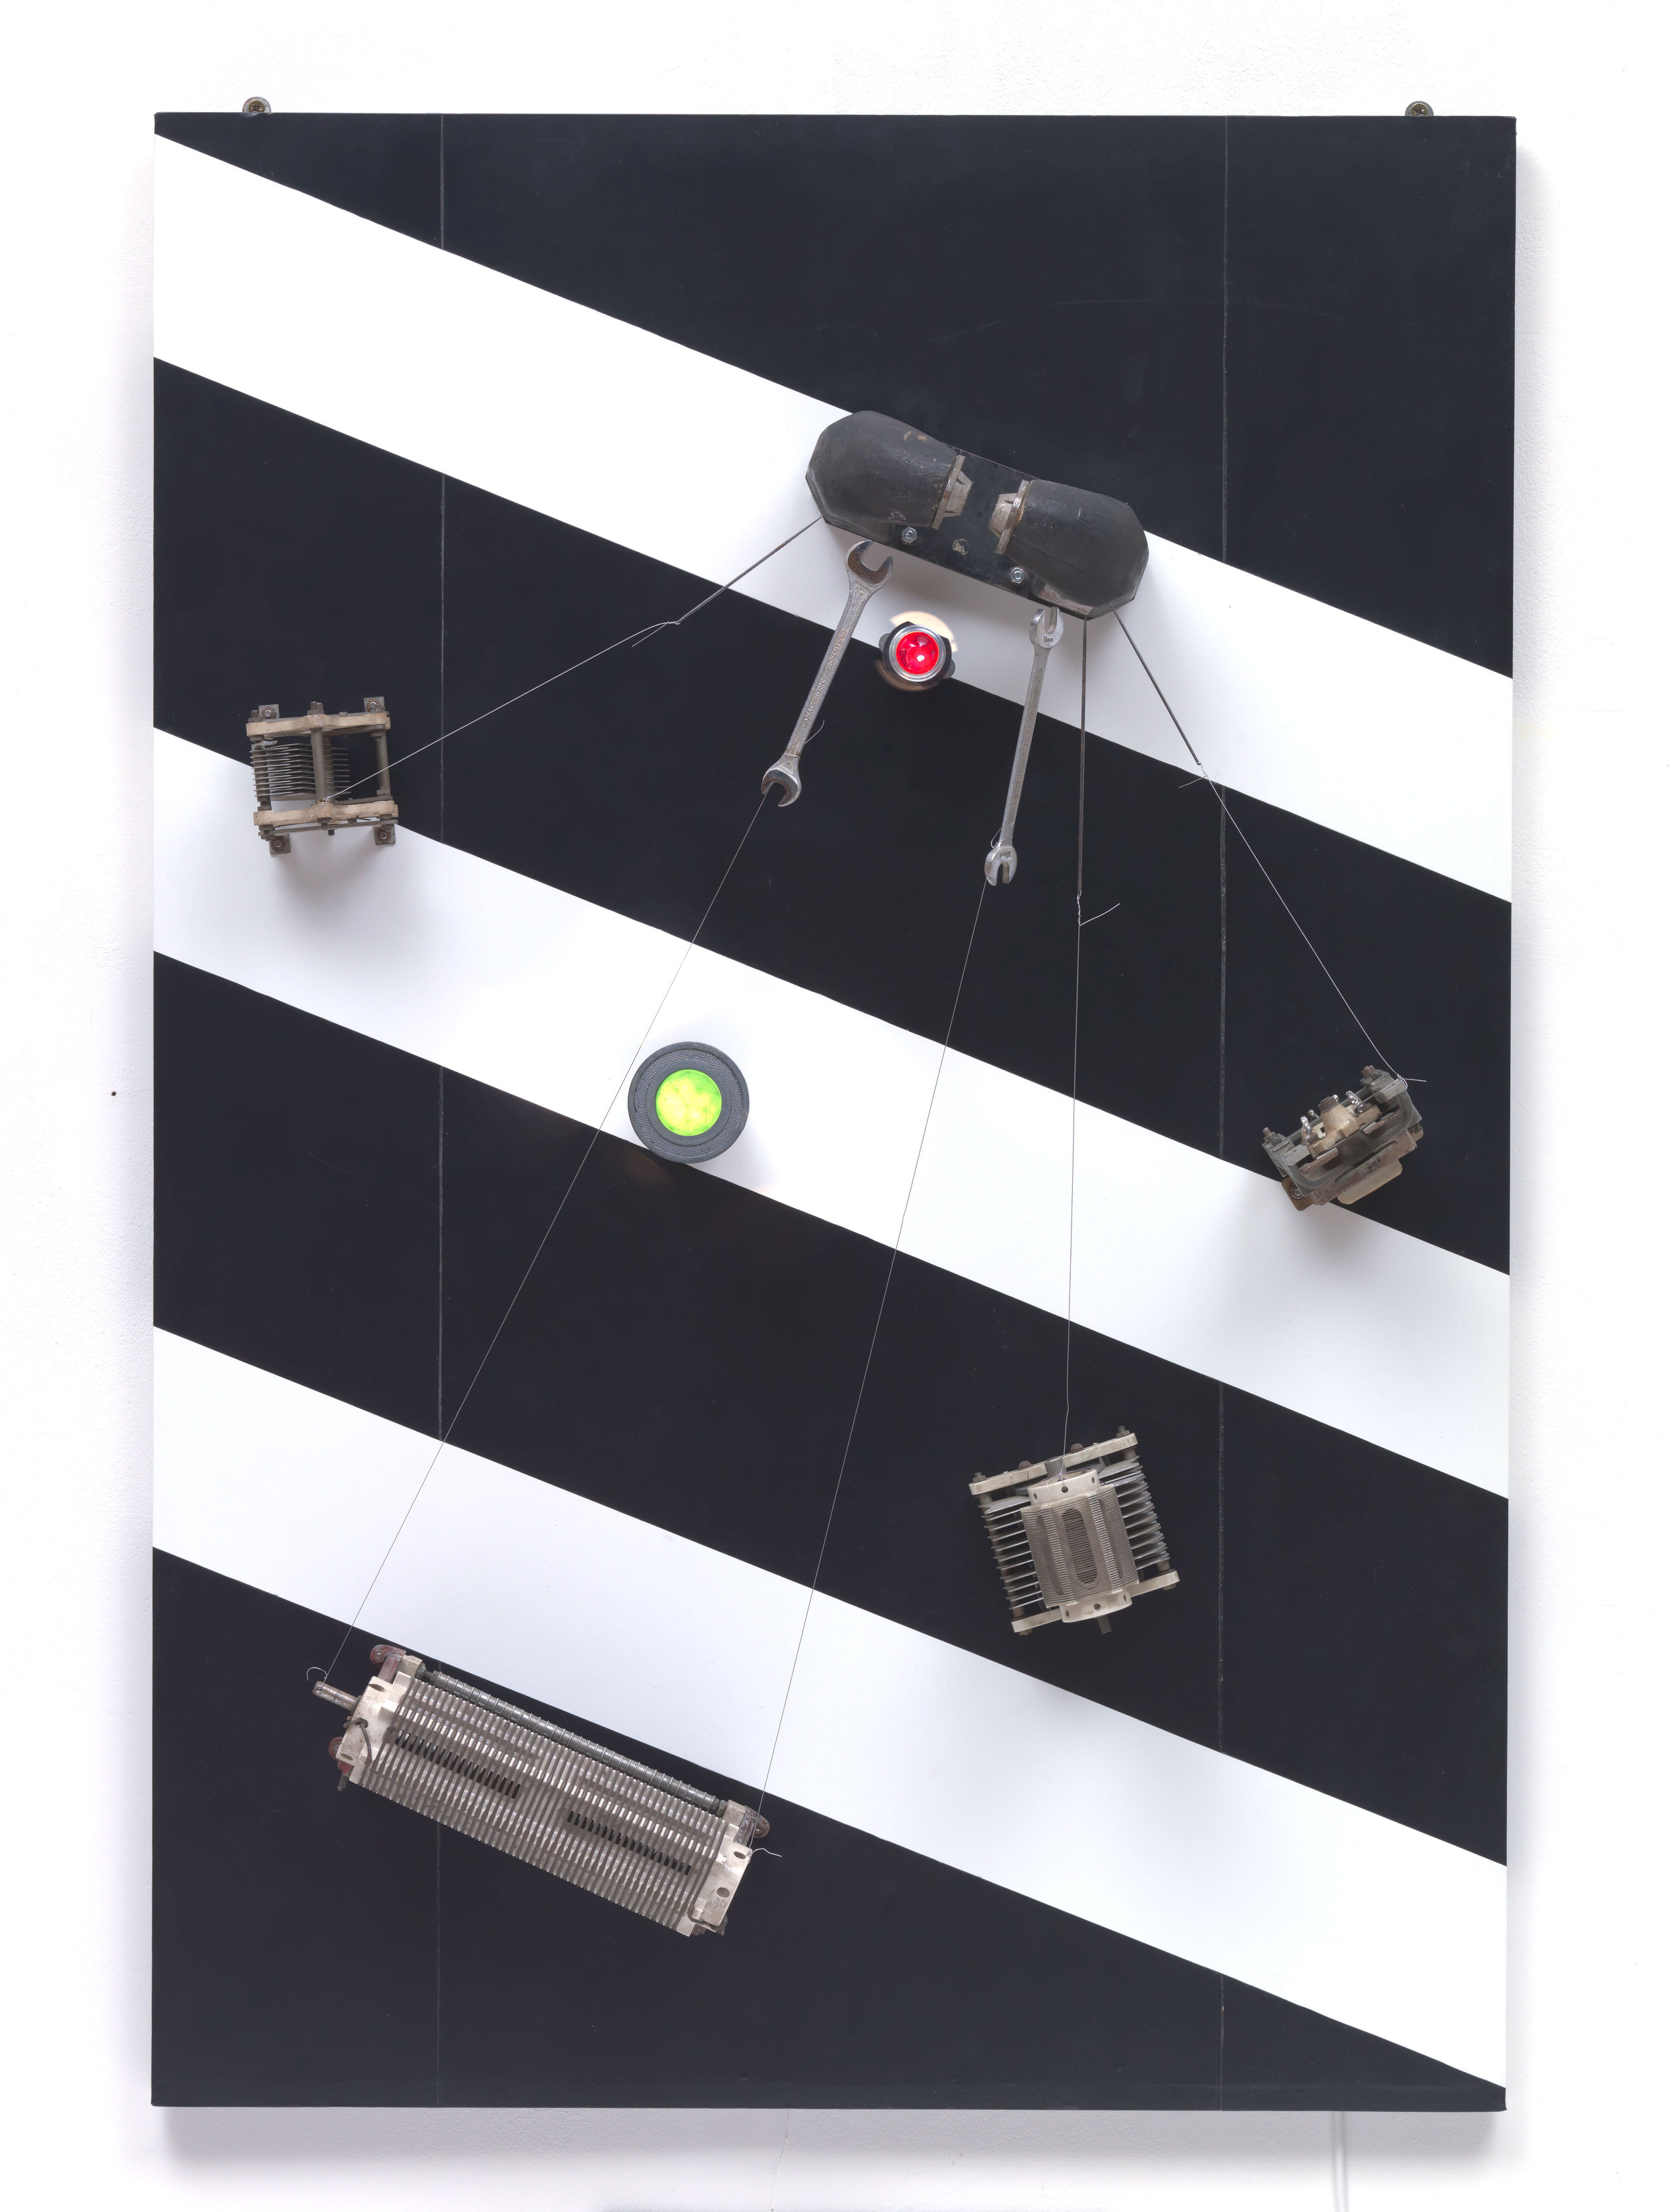   Telepainting  1964 Ceramic, iron, lamps, magnet, nylon thread, plastic, rheostats, steel screwdriver, vinyl, wood 110.1 x 75.2 x 17 cm Private Collection © ADAGP, Paris and DACS, London 2019 Photo: © Tate (Andrew Dunkley and Mark Heathcote) 